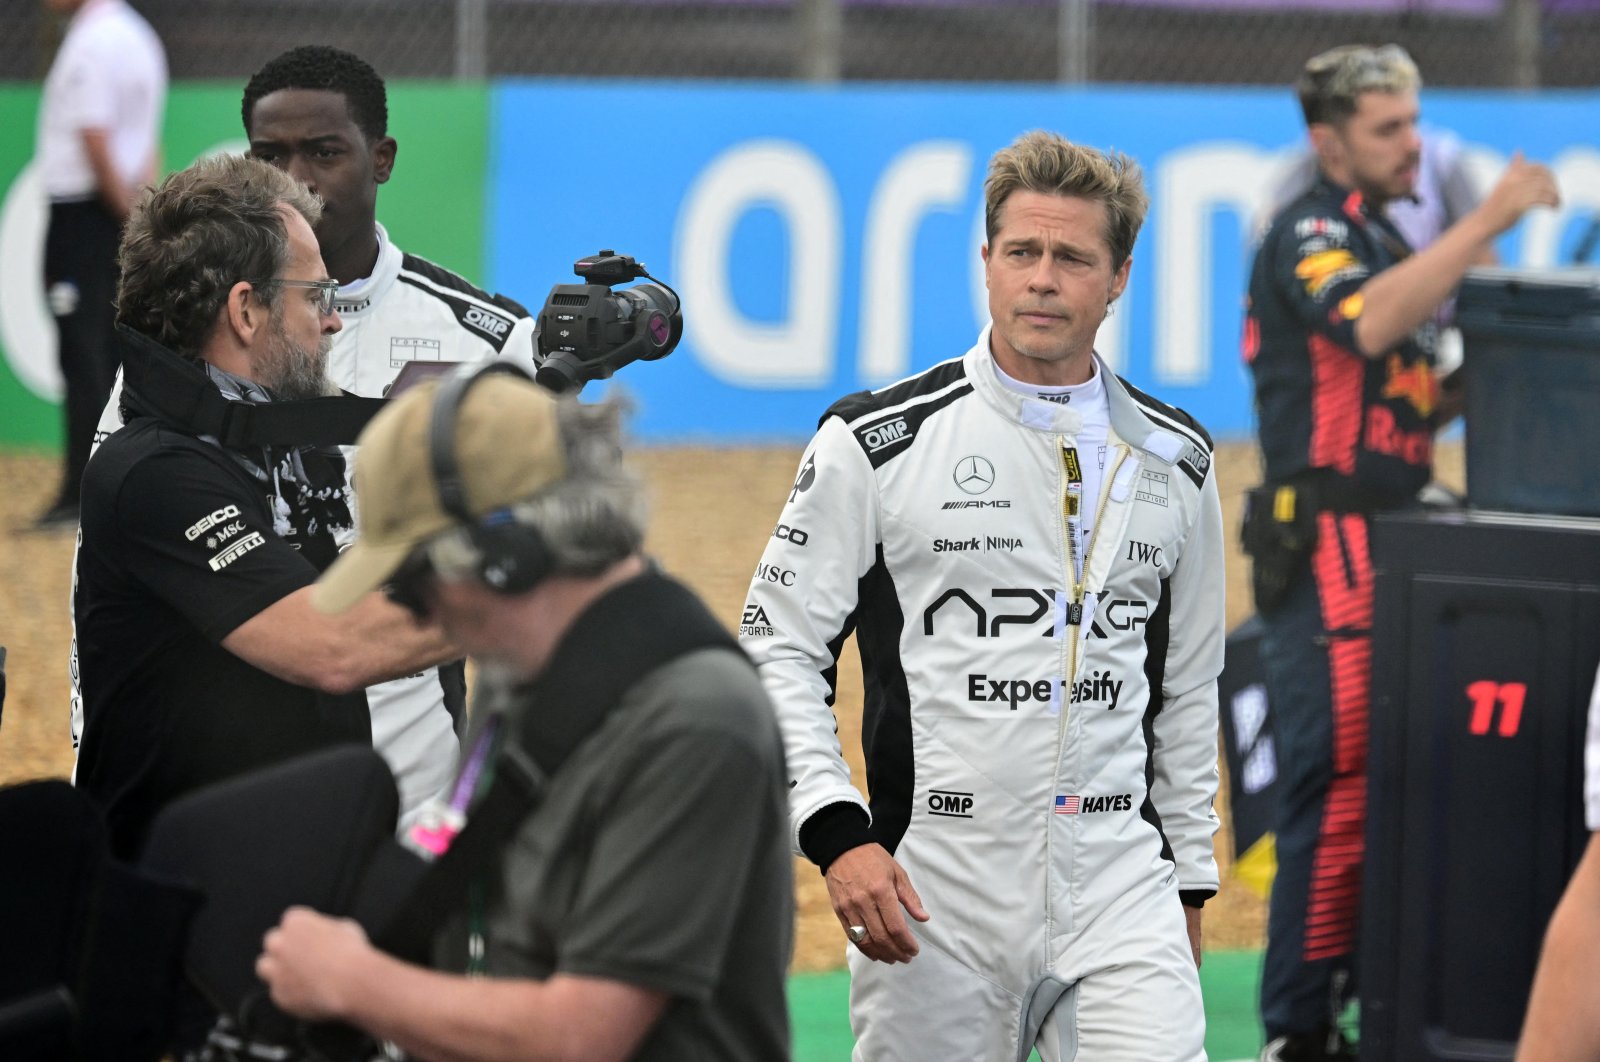 Actor Brad Pitt (R) is pictured at the British Grand Prix during the filming of an F1-inspired movie, Silverstone, U.K., July 9, 2023. (Reuters Photo)